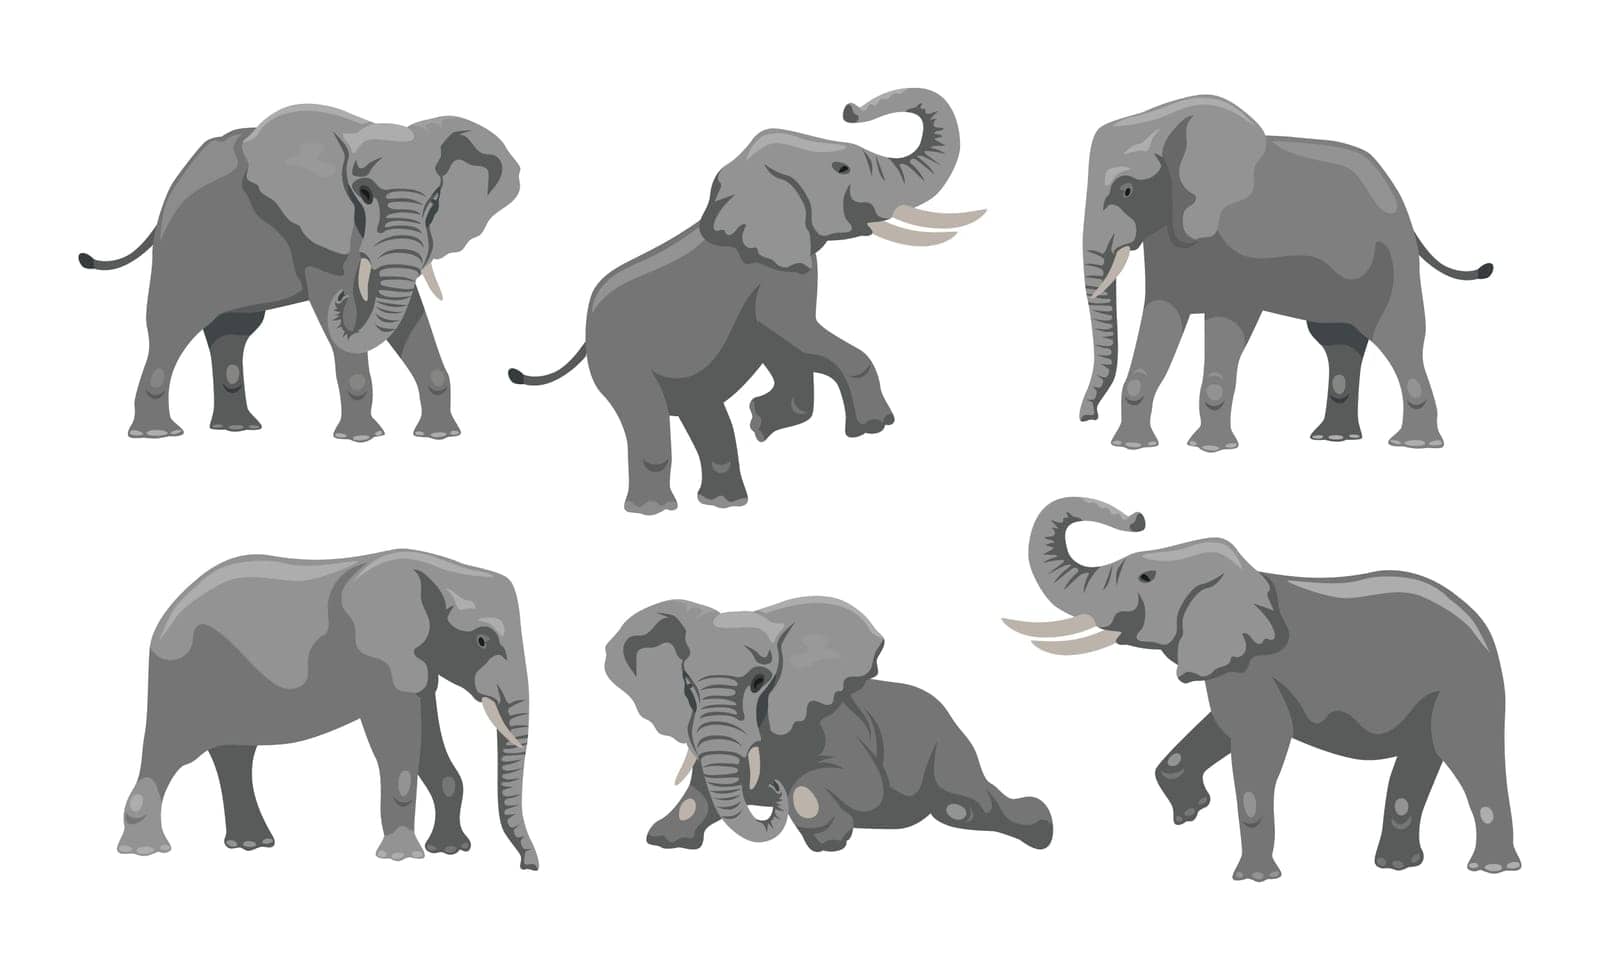 Gray elephant in different positions cartoon illustration set by pchvector